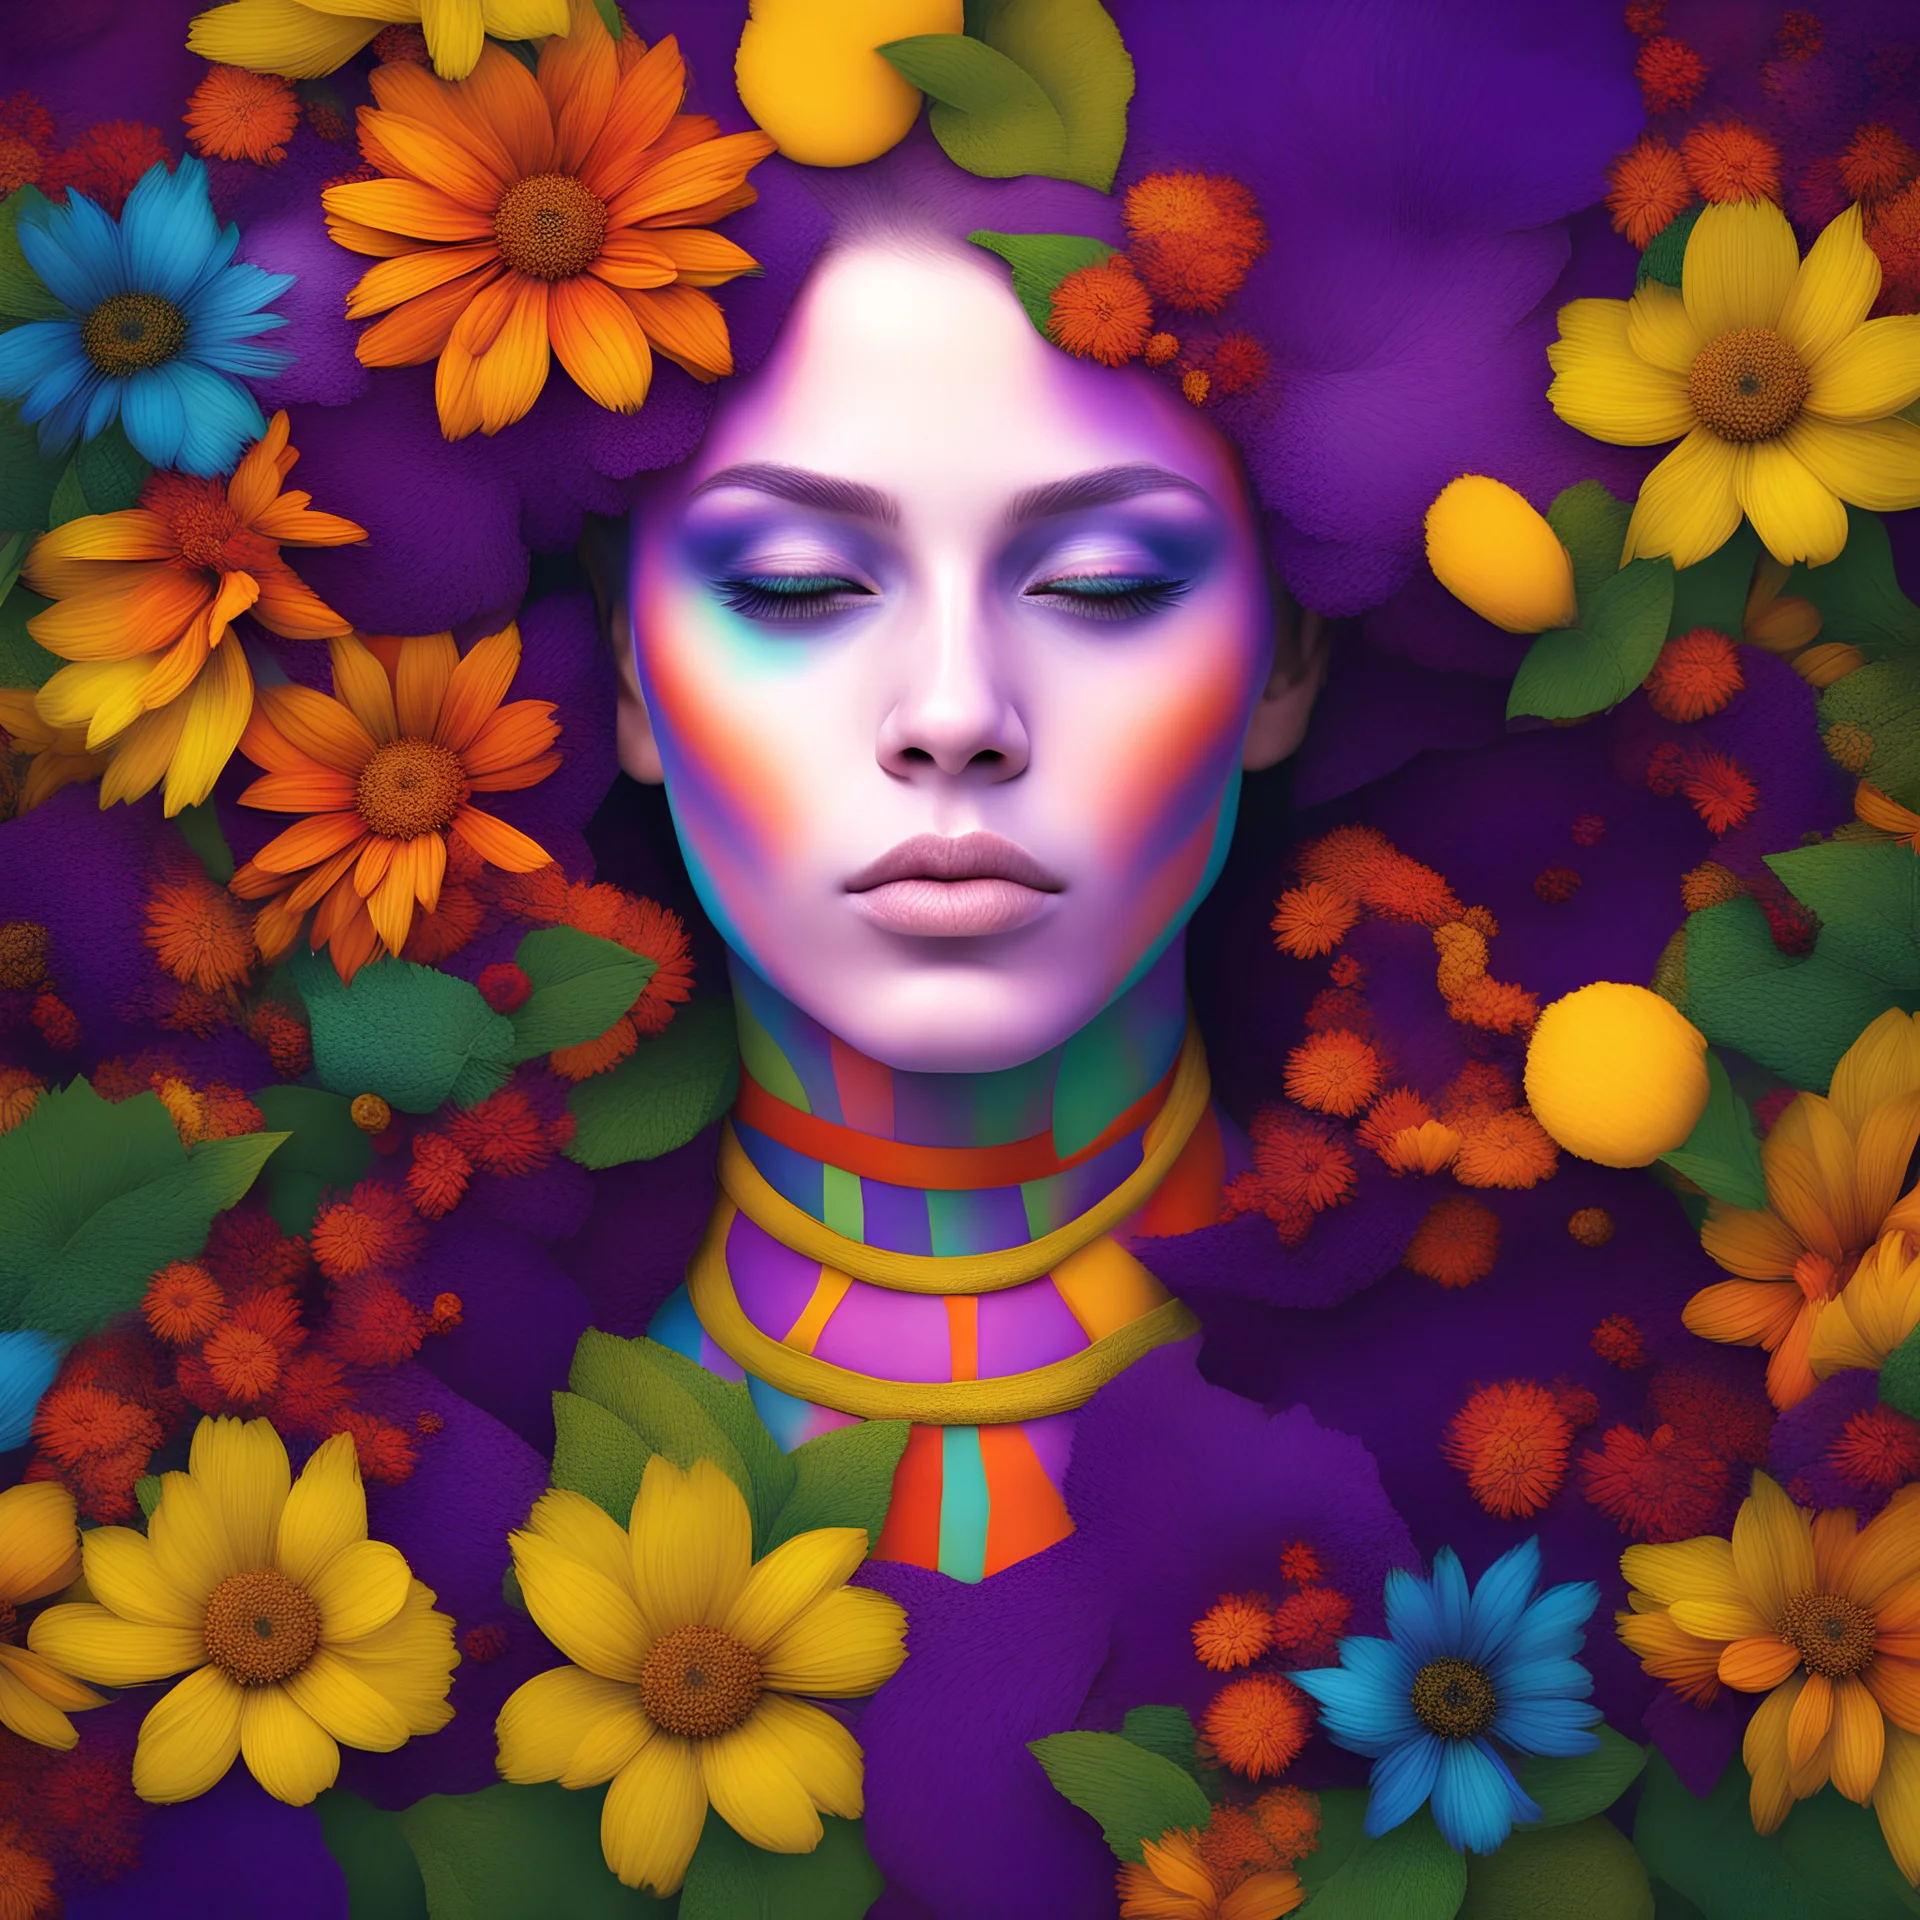 A woman with a vibrant and colorful face is seen in the image. She has several flowers of different colors adorning her face, including purple, green, and yellow. Her eyes are closed as if she is lost in thought or deep concentration. The flowers appear to be arranged around her eyes and forehead in an artistic pattern that draws attention to her features. Her hair is pulled back away from her face, allowing for the full effect of the flower arrangement to be seen. She wears a green shirt which